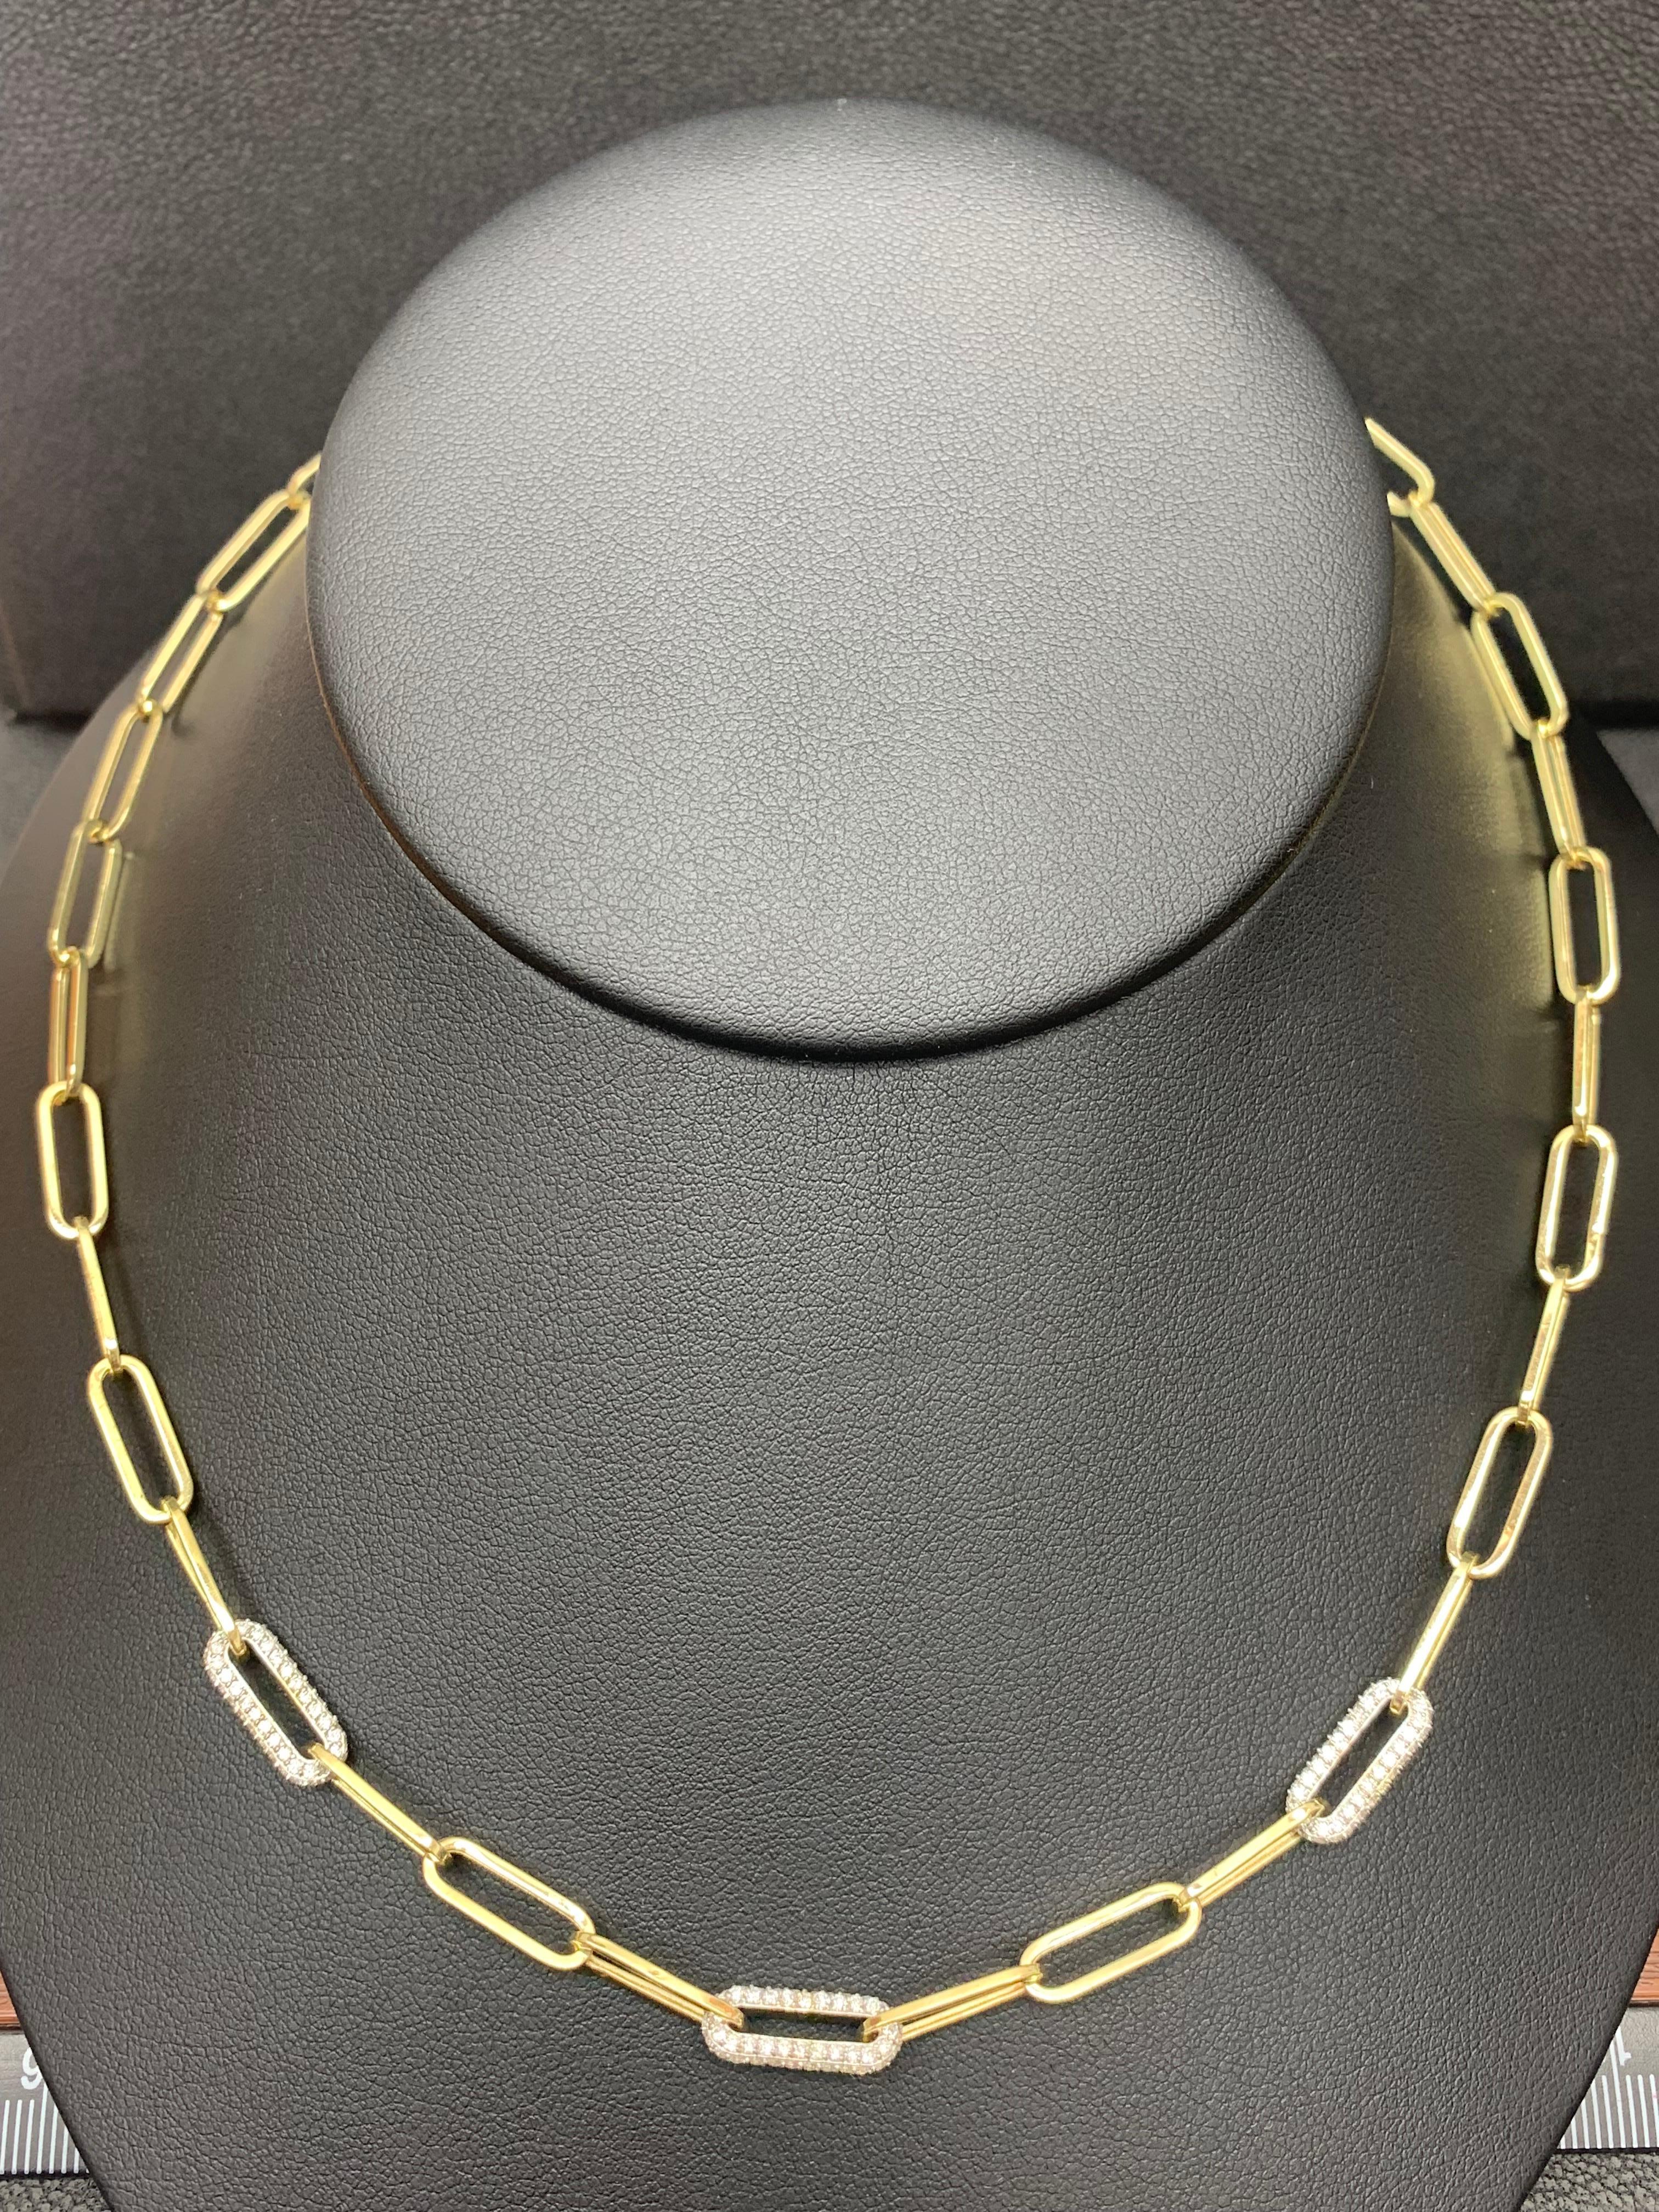 This Elegant & Beautiful 14K Yellow Gold Necklace featuring 3 diamond clips towards the center weighs 1.92 carats  with a lobster clasp.


All diamonds are GH color SI1 Clarity.
Available in Rose and White as well.
Style available in different price